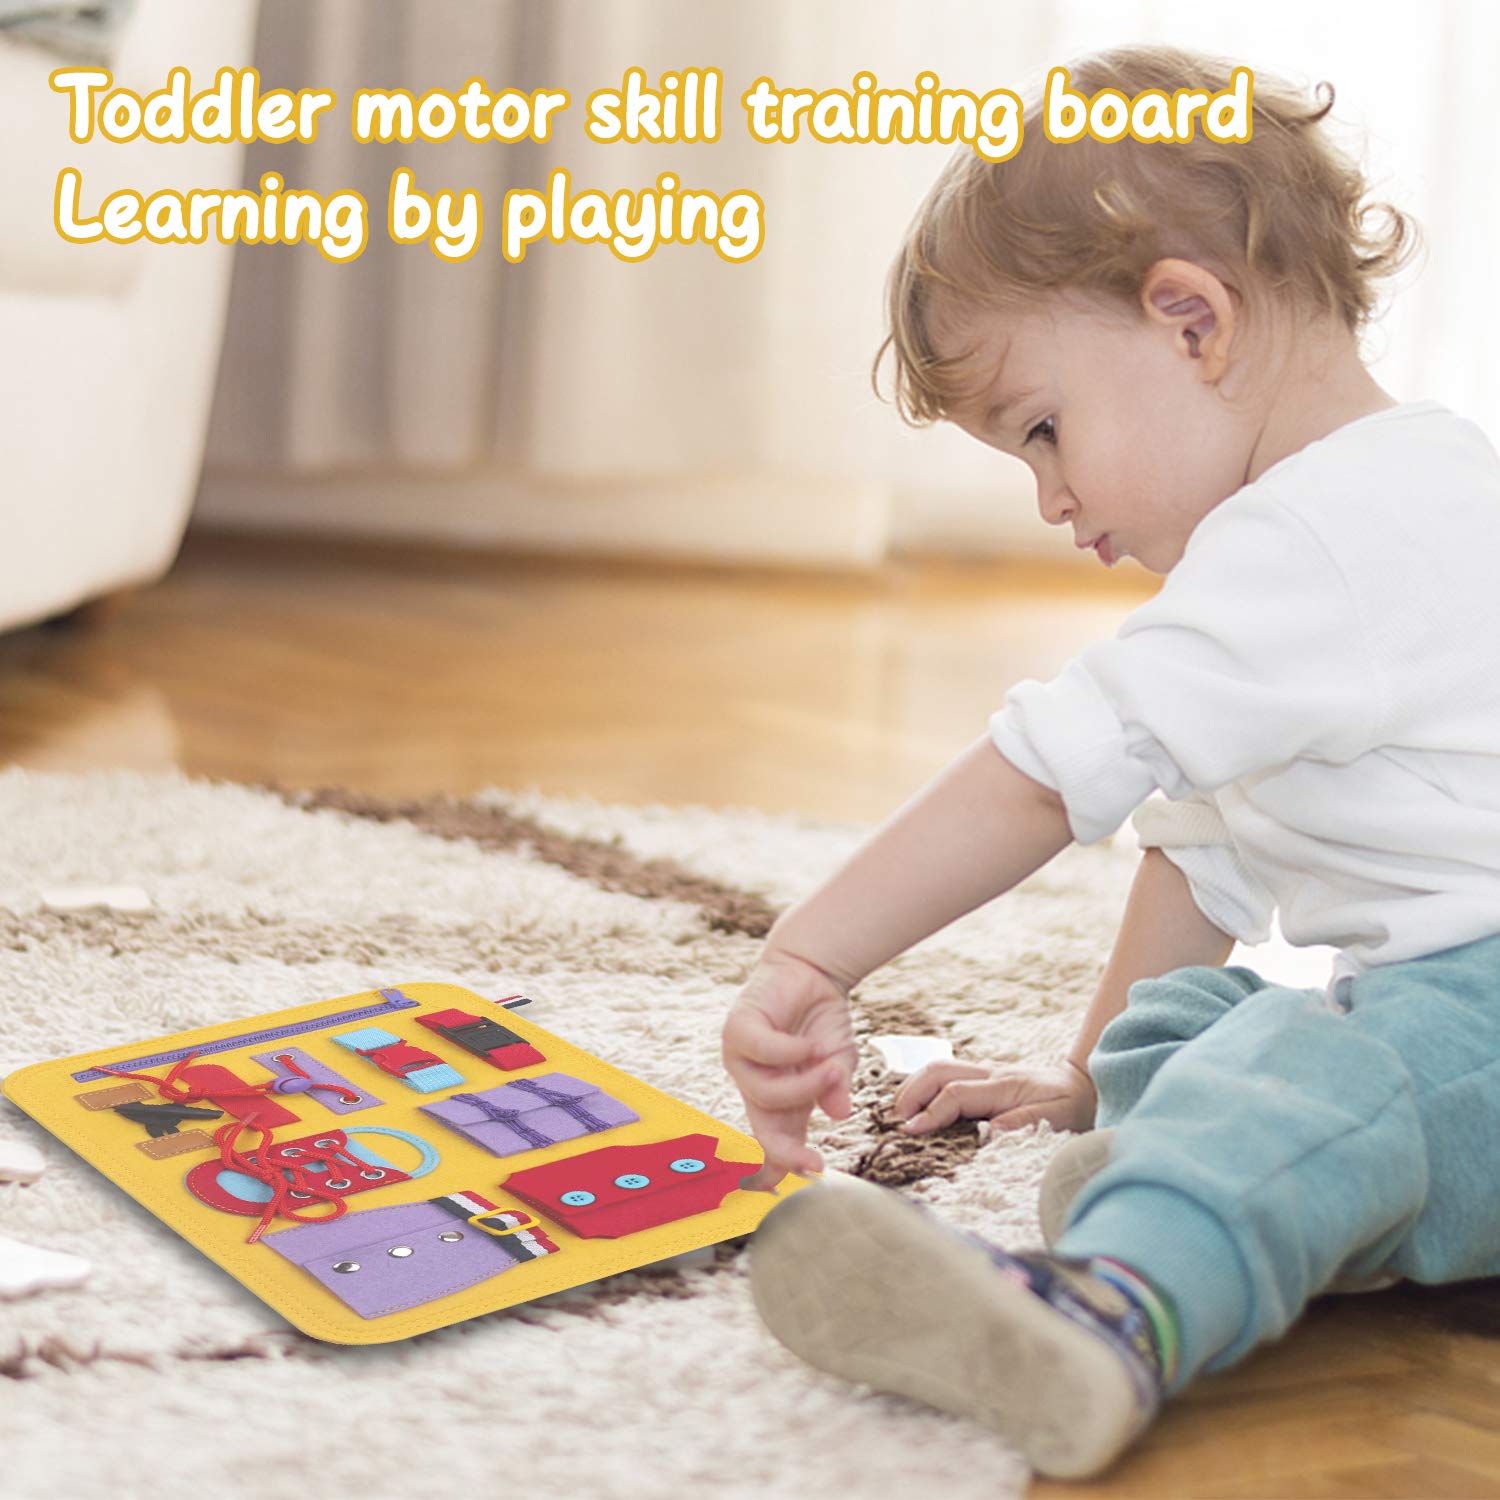 ABirdon Busy Board for Toddlers, Montessori Toys for Baby Learn Preschool Basic Skills, Sensory Toys for Practice Fine Motor Skills, Autism Educational Learning Toys for Airplane, Car or Home